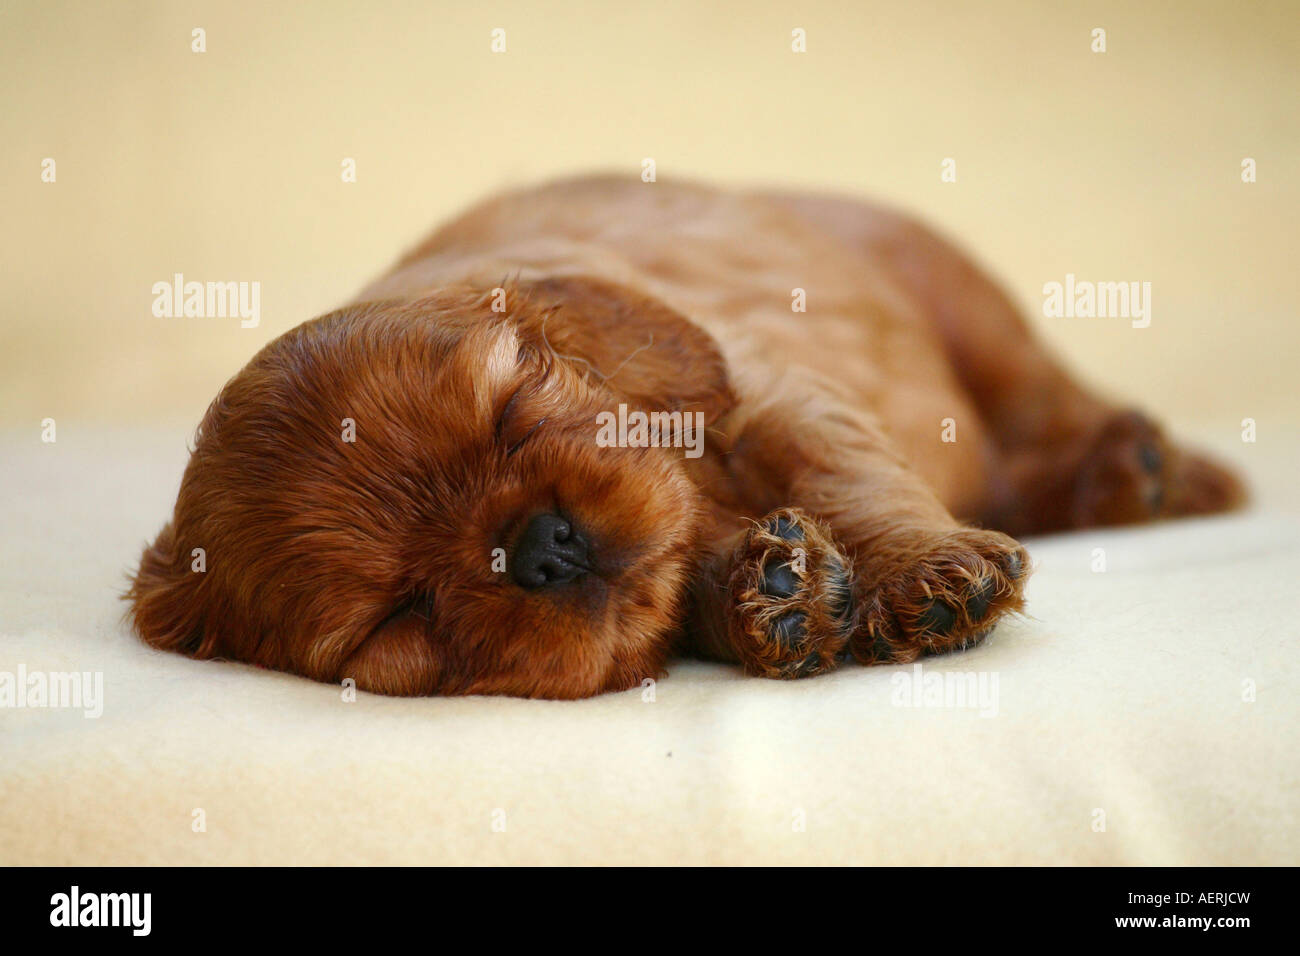 Cavalier King Charles Spaniel puppy ruby 5 weeks Stock Photo